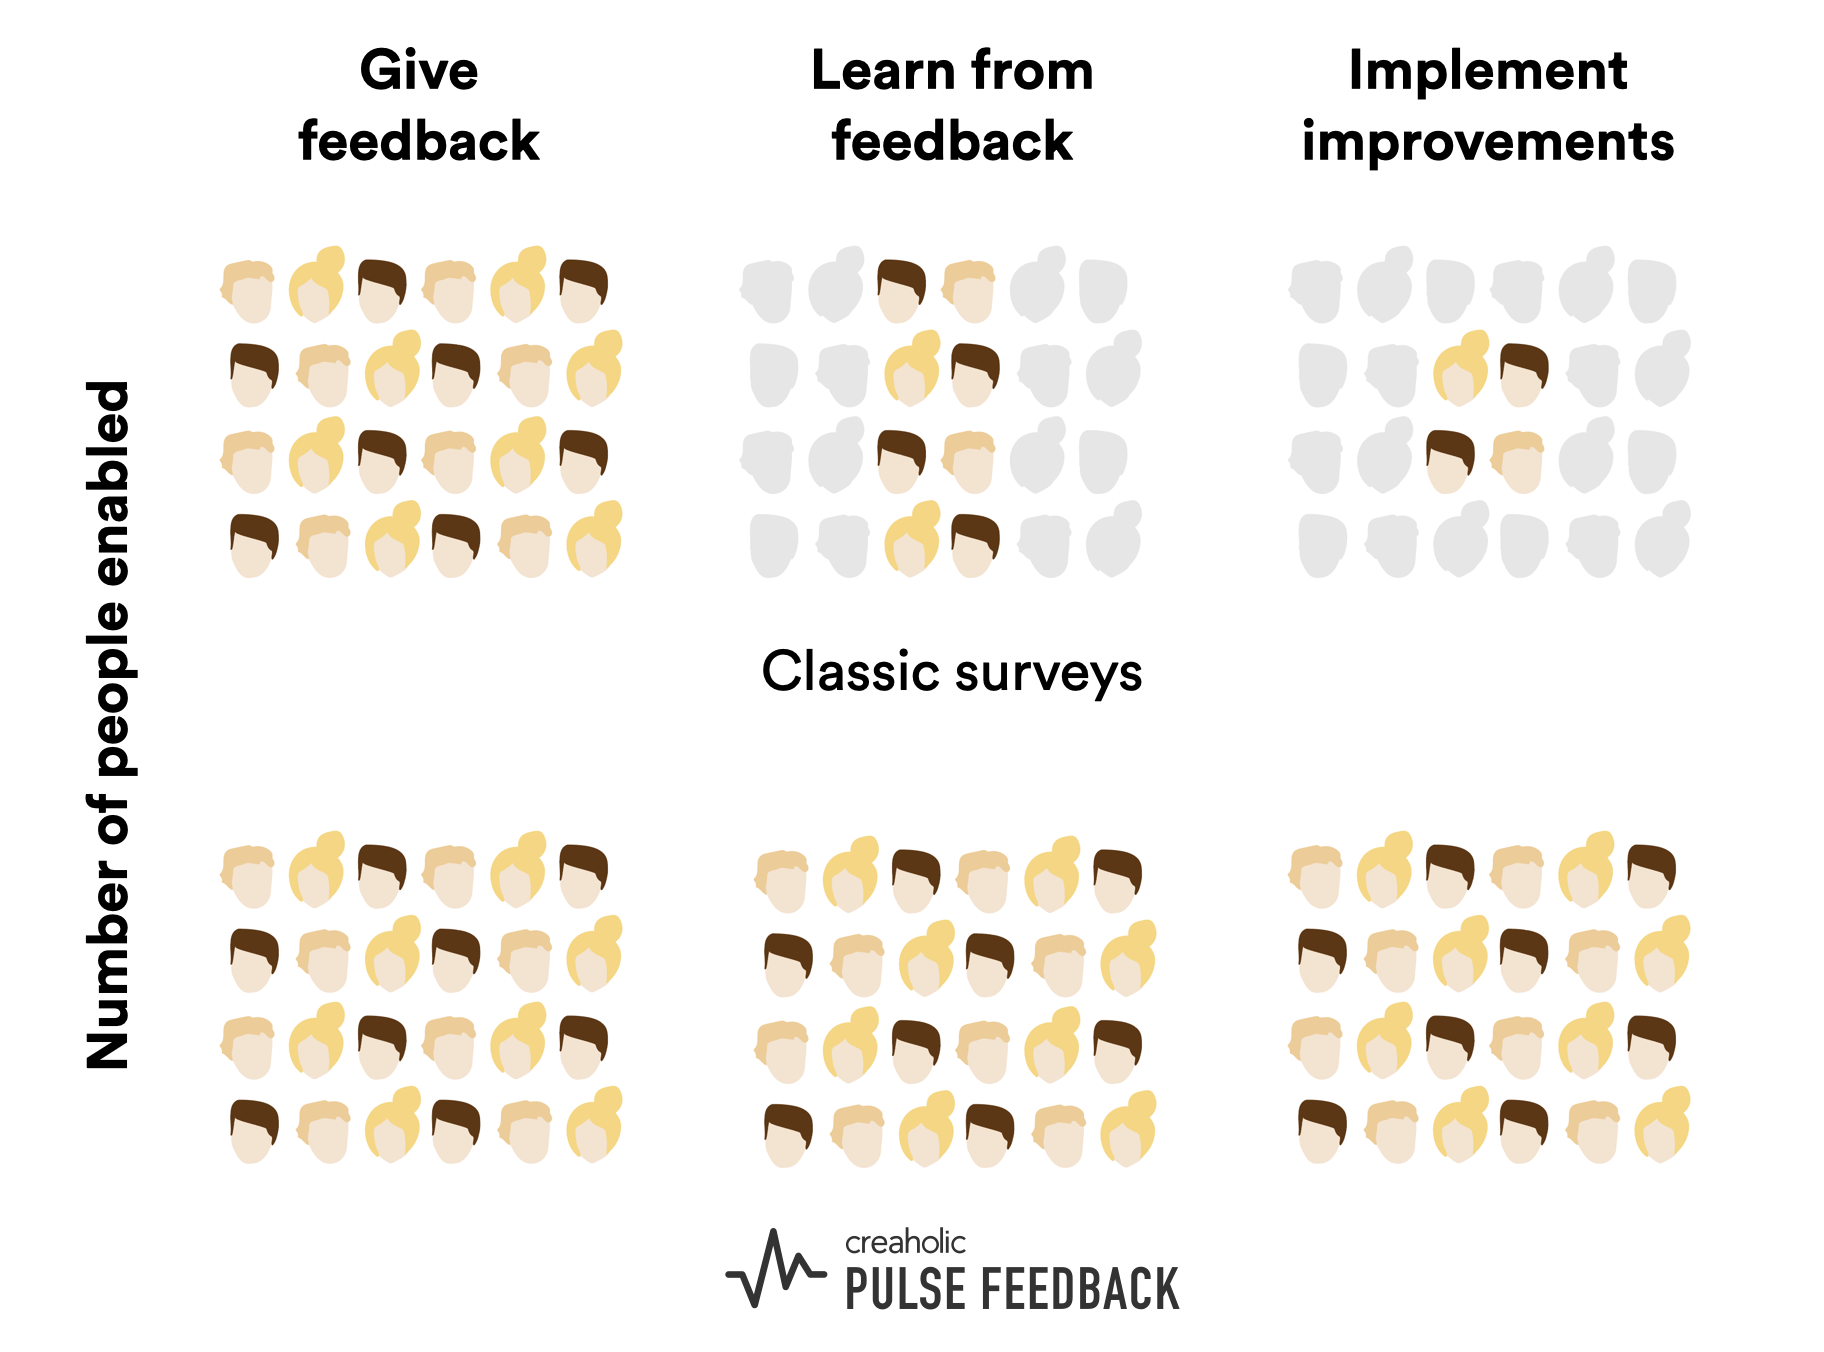 Graphic showing the comparison of a classic employee survey and Pulse. With Pulse, everyone can learn from the feedback and implement improvements.